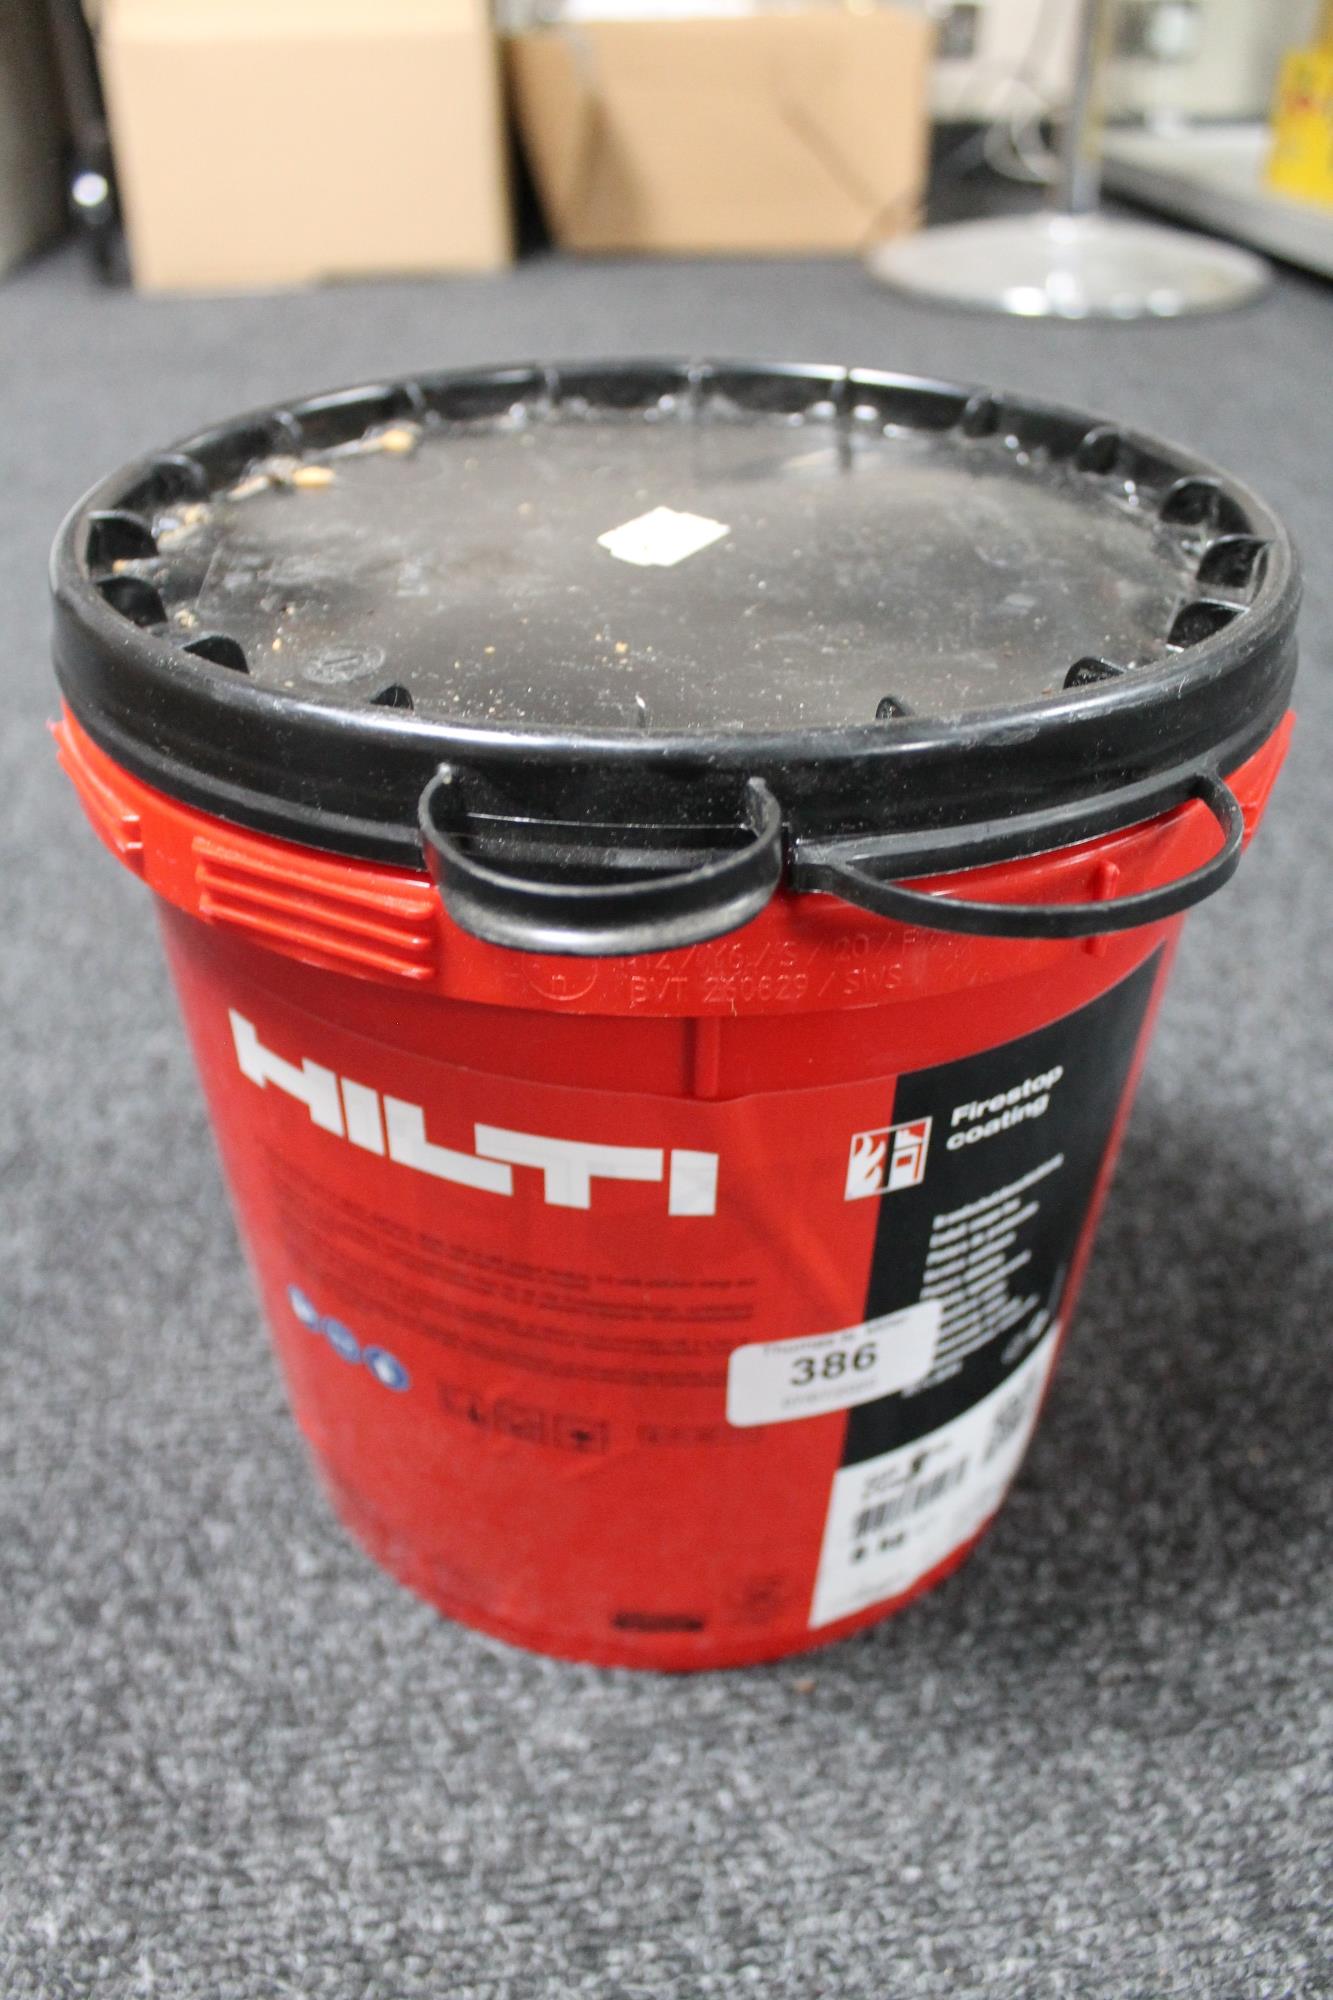 A tub of Hilti 6kg fire stop coating